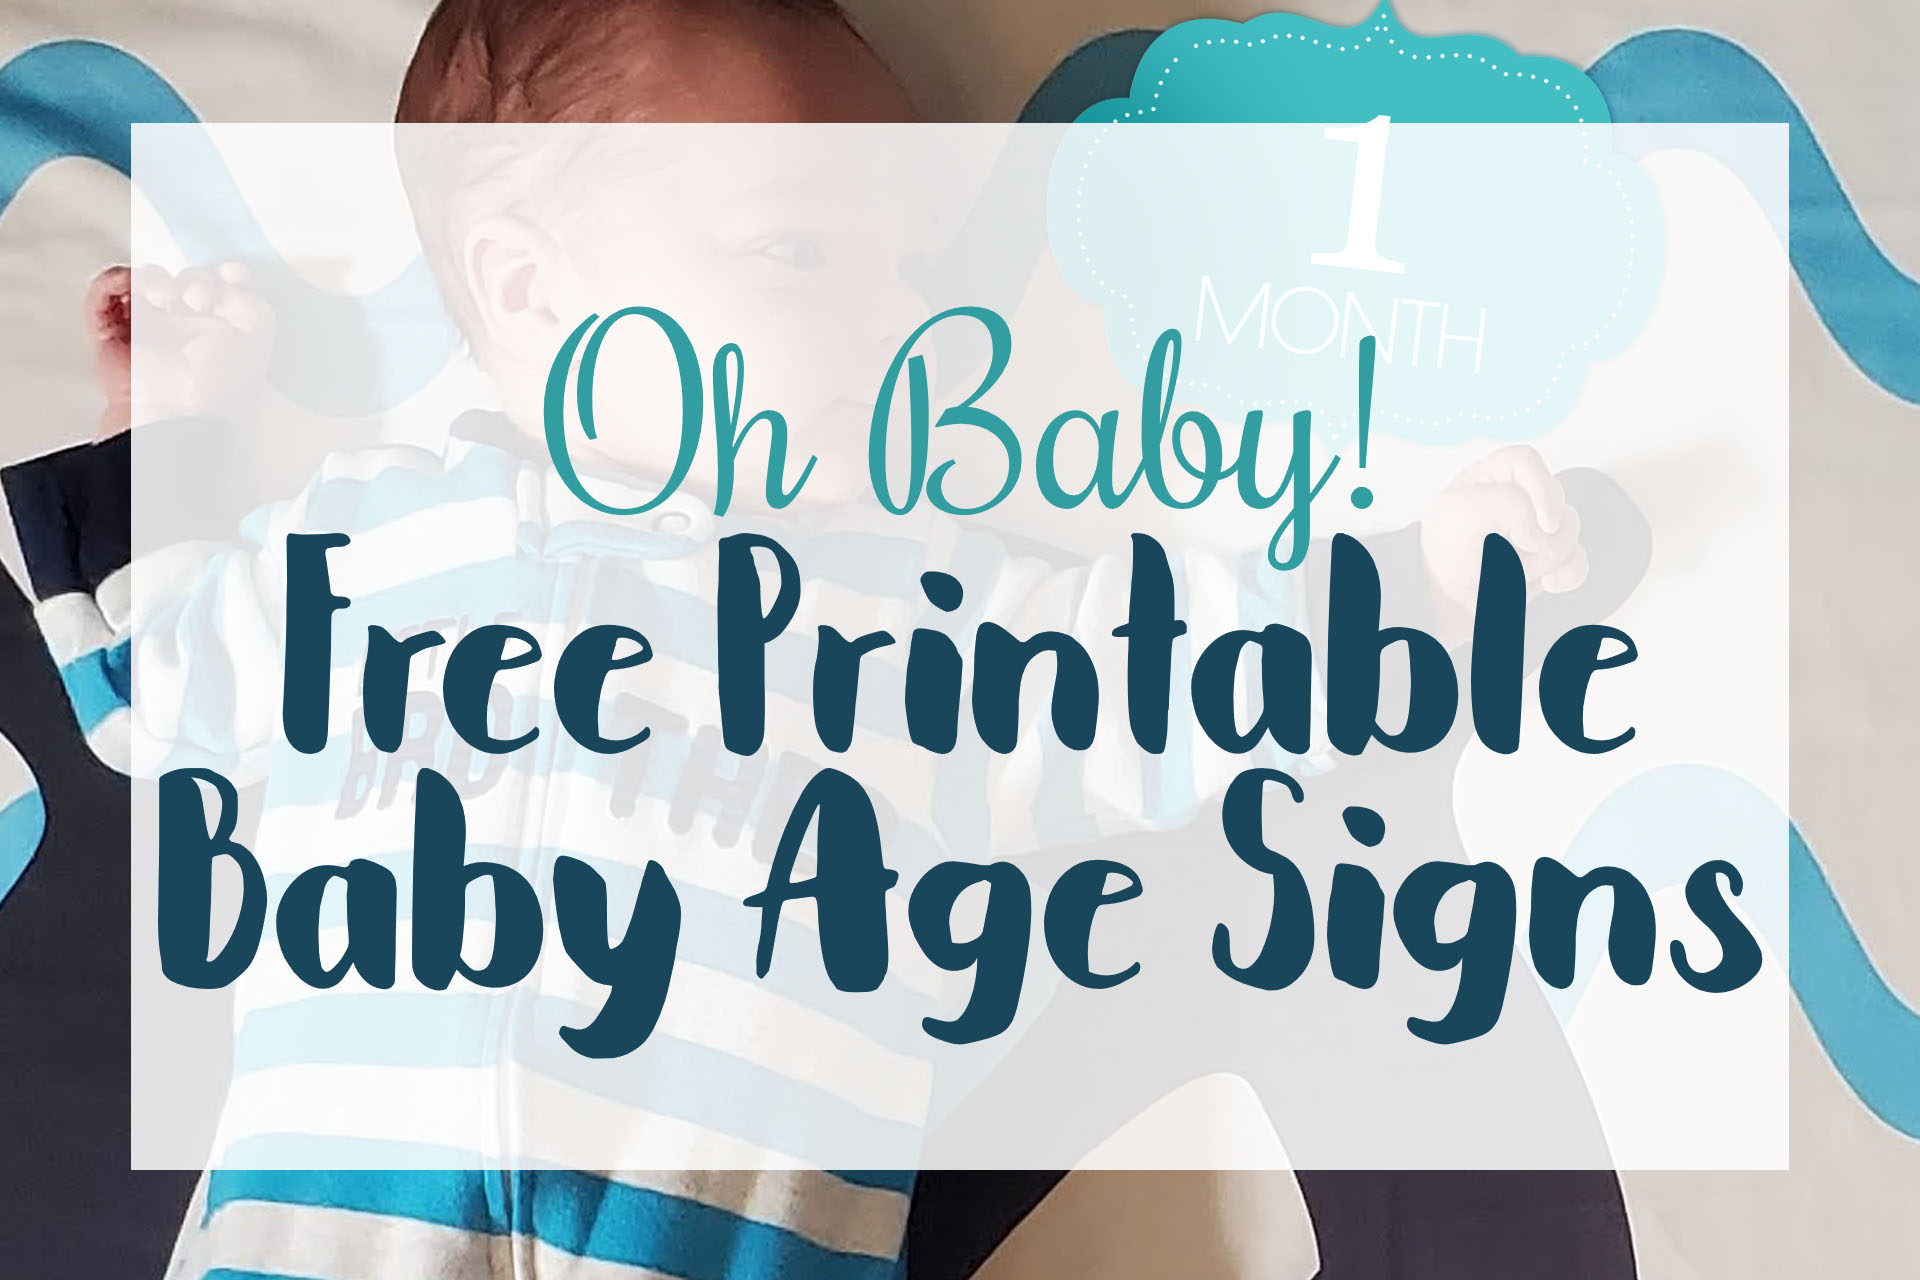 Free Printable Baby Age Signs